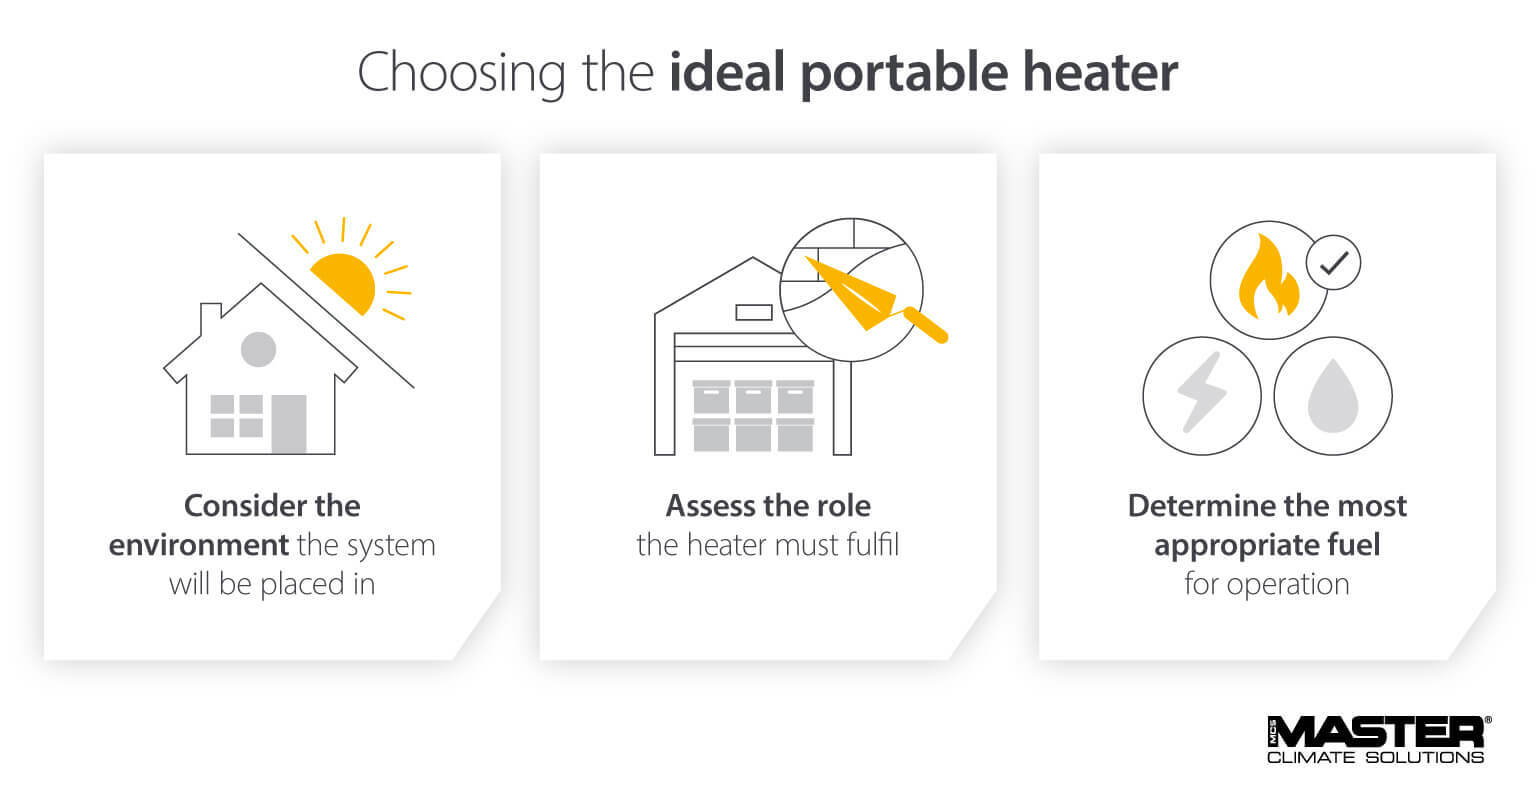 Choosing the ideal portable heater to help reduce energy consumption and costs - Master infographic image